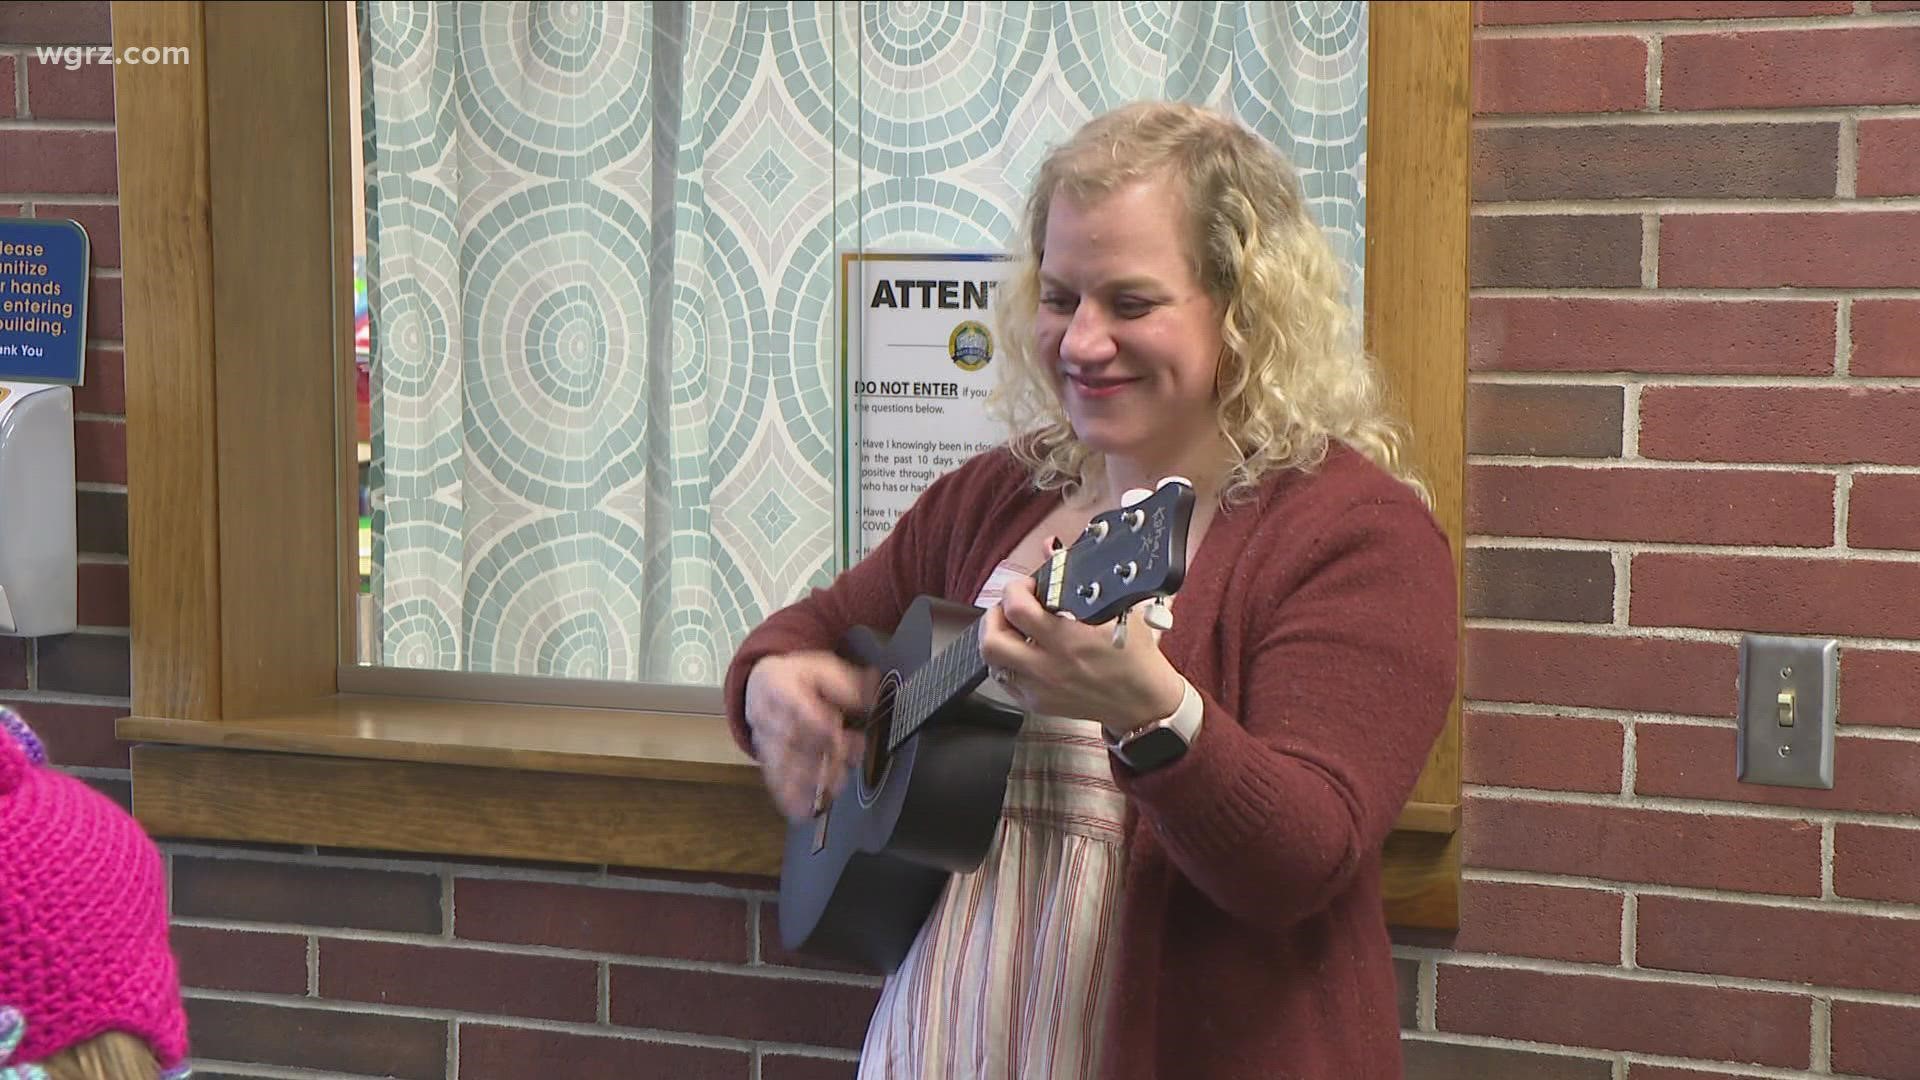 Katie Clark's love for music echoes beyond the walls of her classroom. She performs daily for students as they arrive at school.